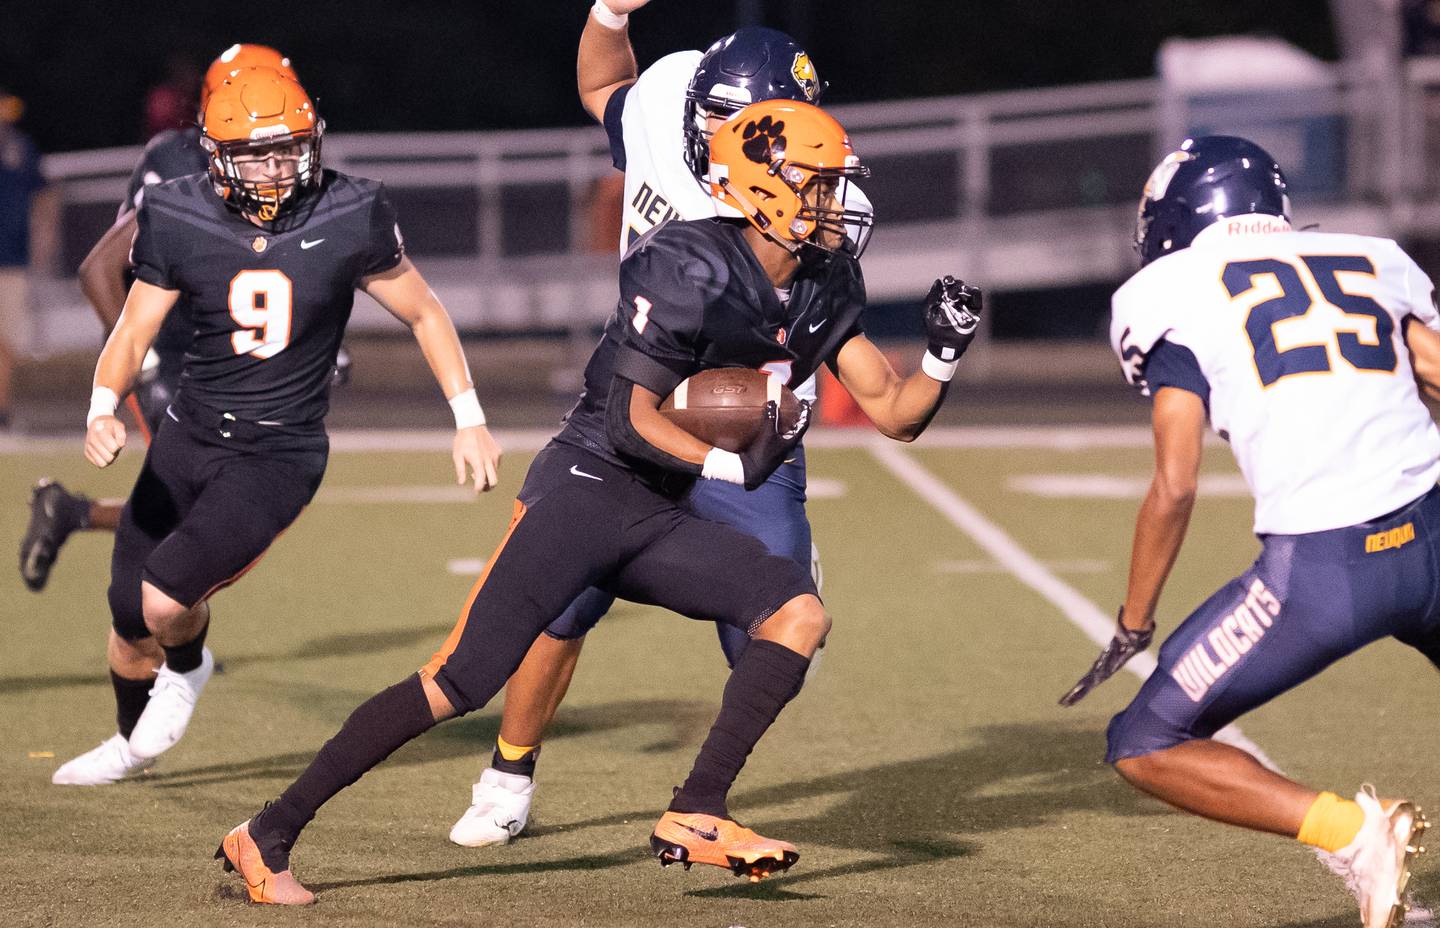 Wheaton Warrenville South's Reece Young (1) carries the ball against Neuqua Valley during a football game at Wheaton Warrenville South High School in Wheaton on Friday, Sep 3, 2021.